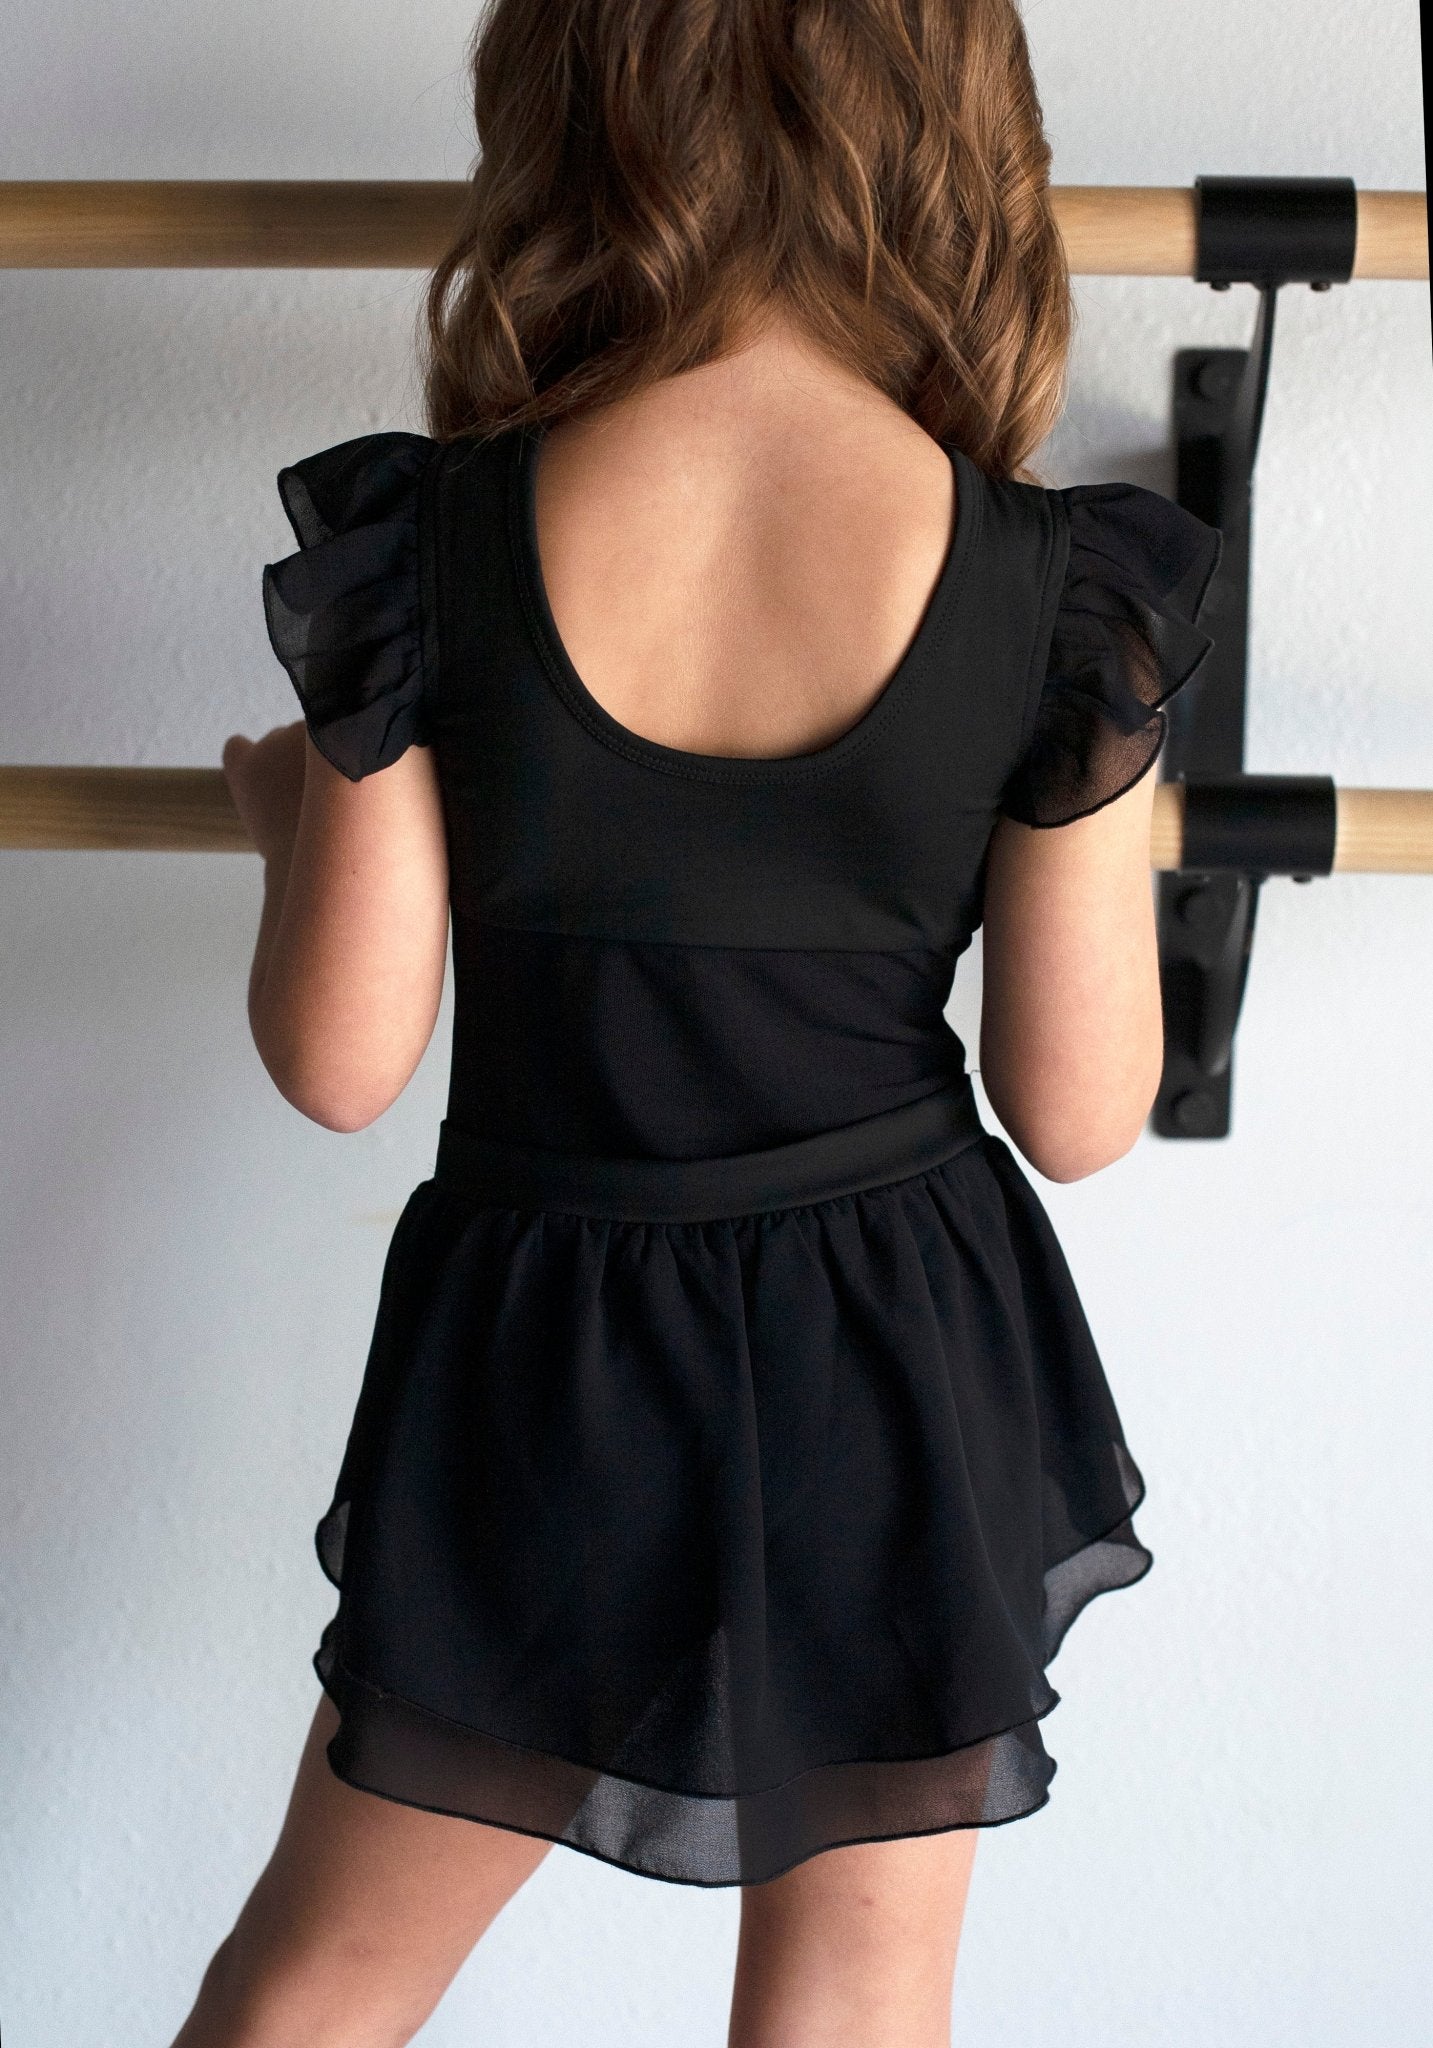 Ballet Barre Onyx Skirted Butterfly Sleeve One Piece Leo - Evie's Closet Clothing